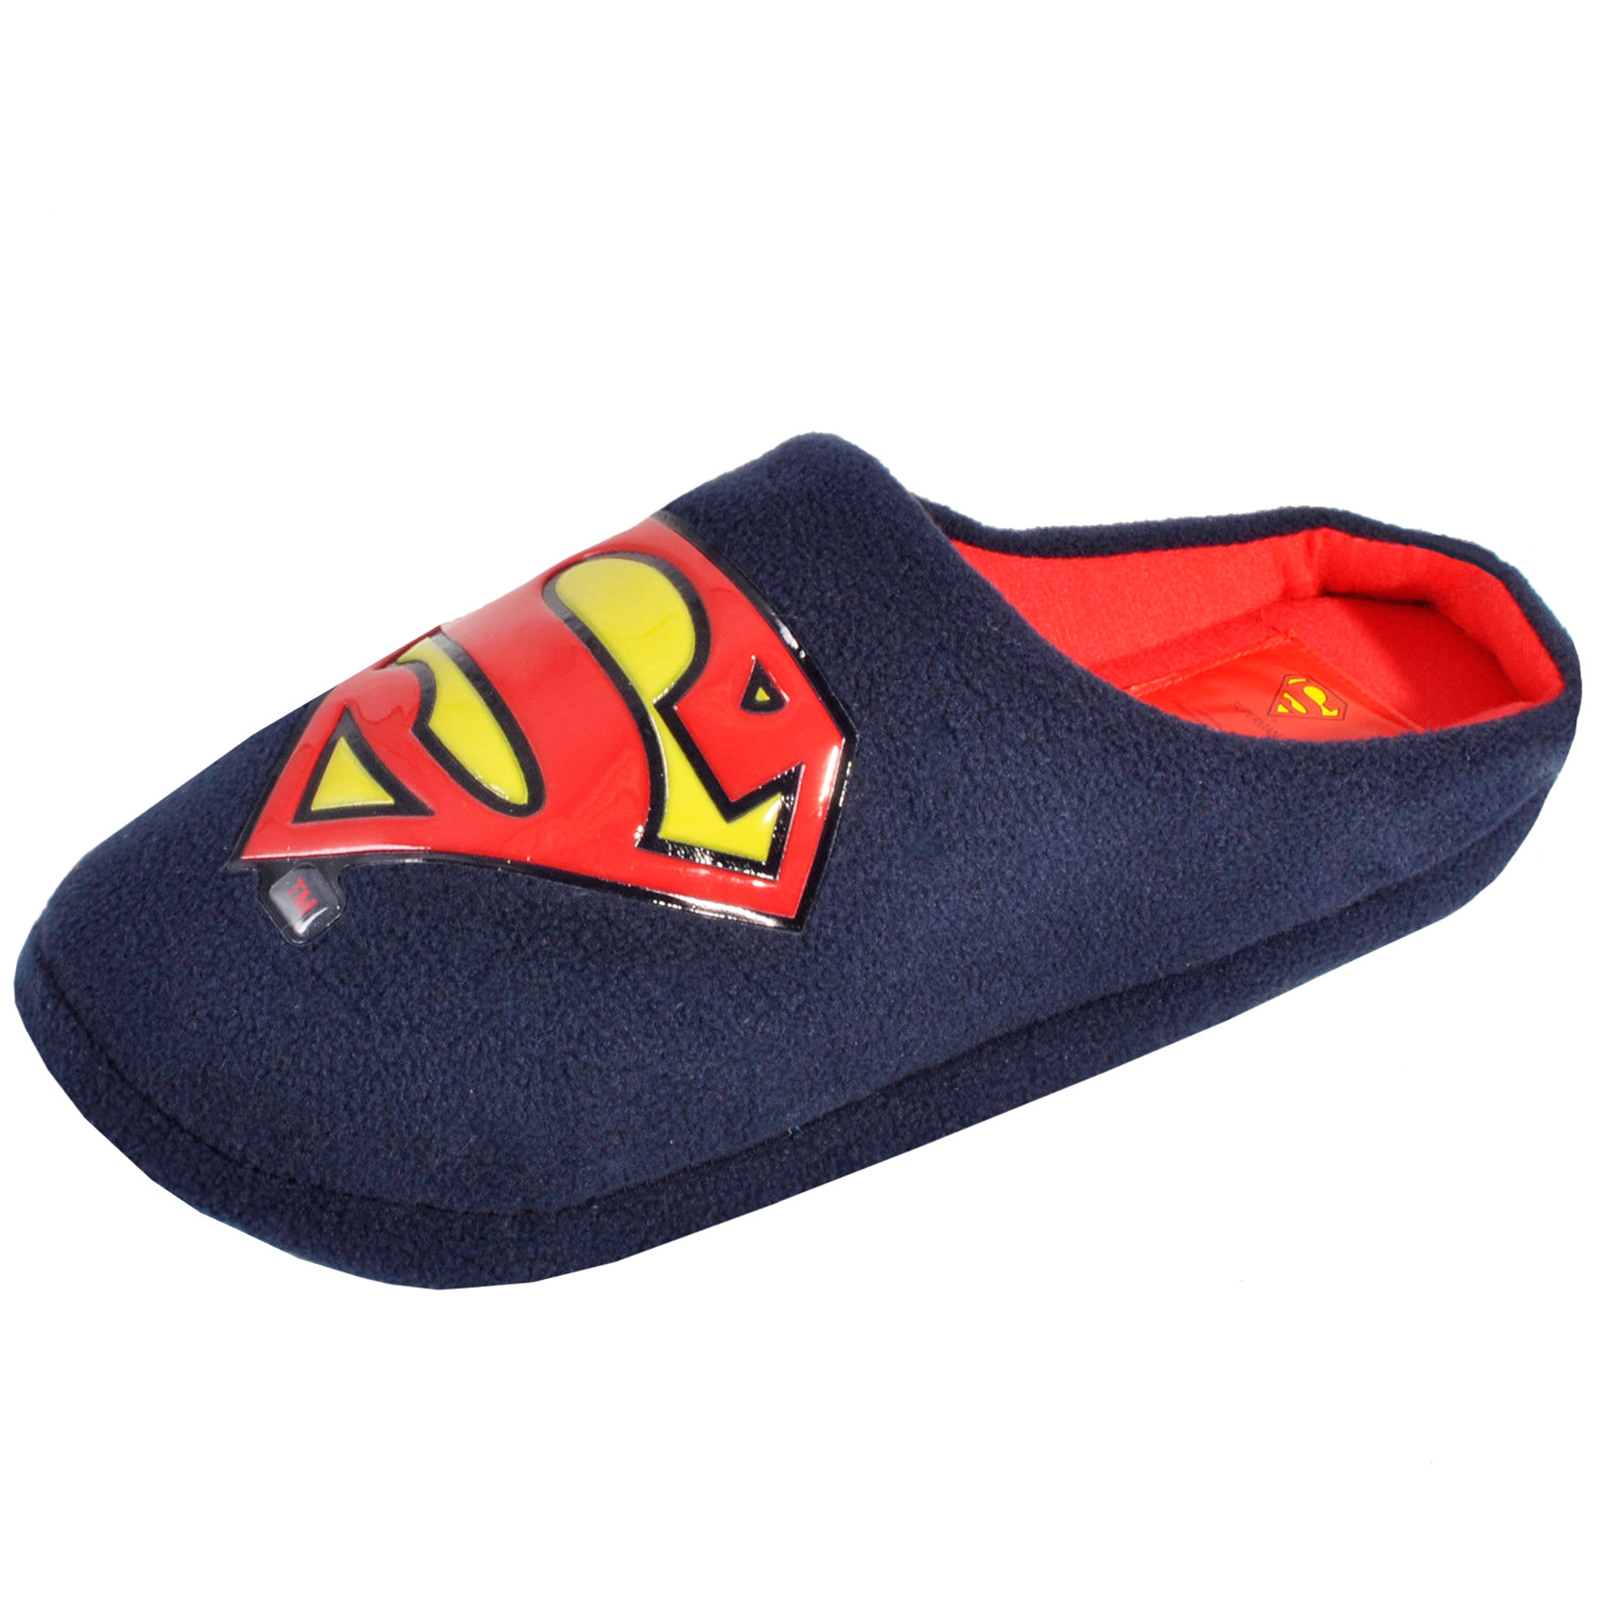 MENS NOVELTY SUPERMAN SLIPPERS SLIP-ON WARM COMFY INDOOR MULES XMAS ...